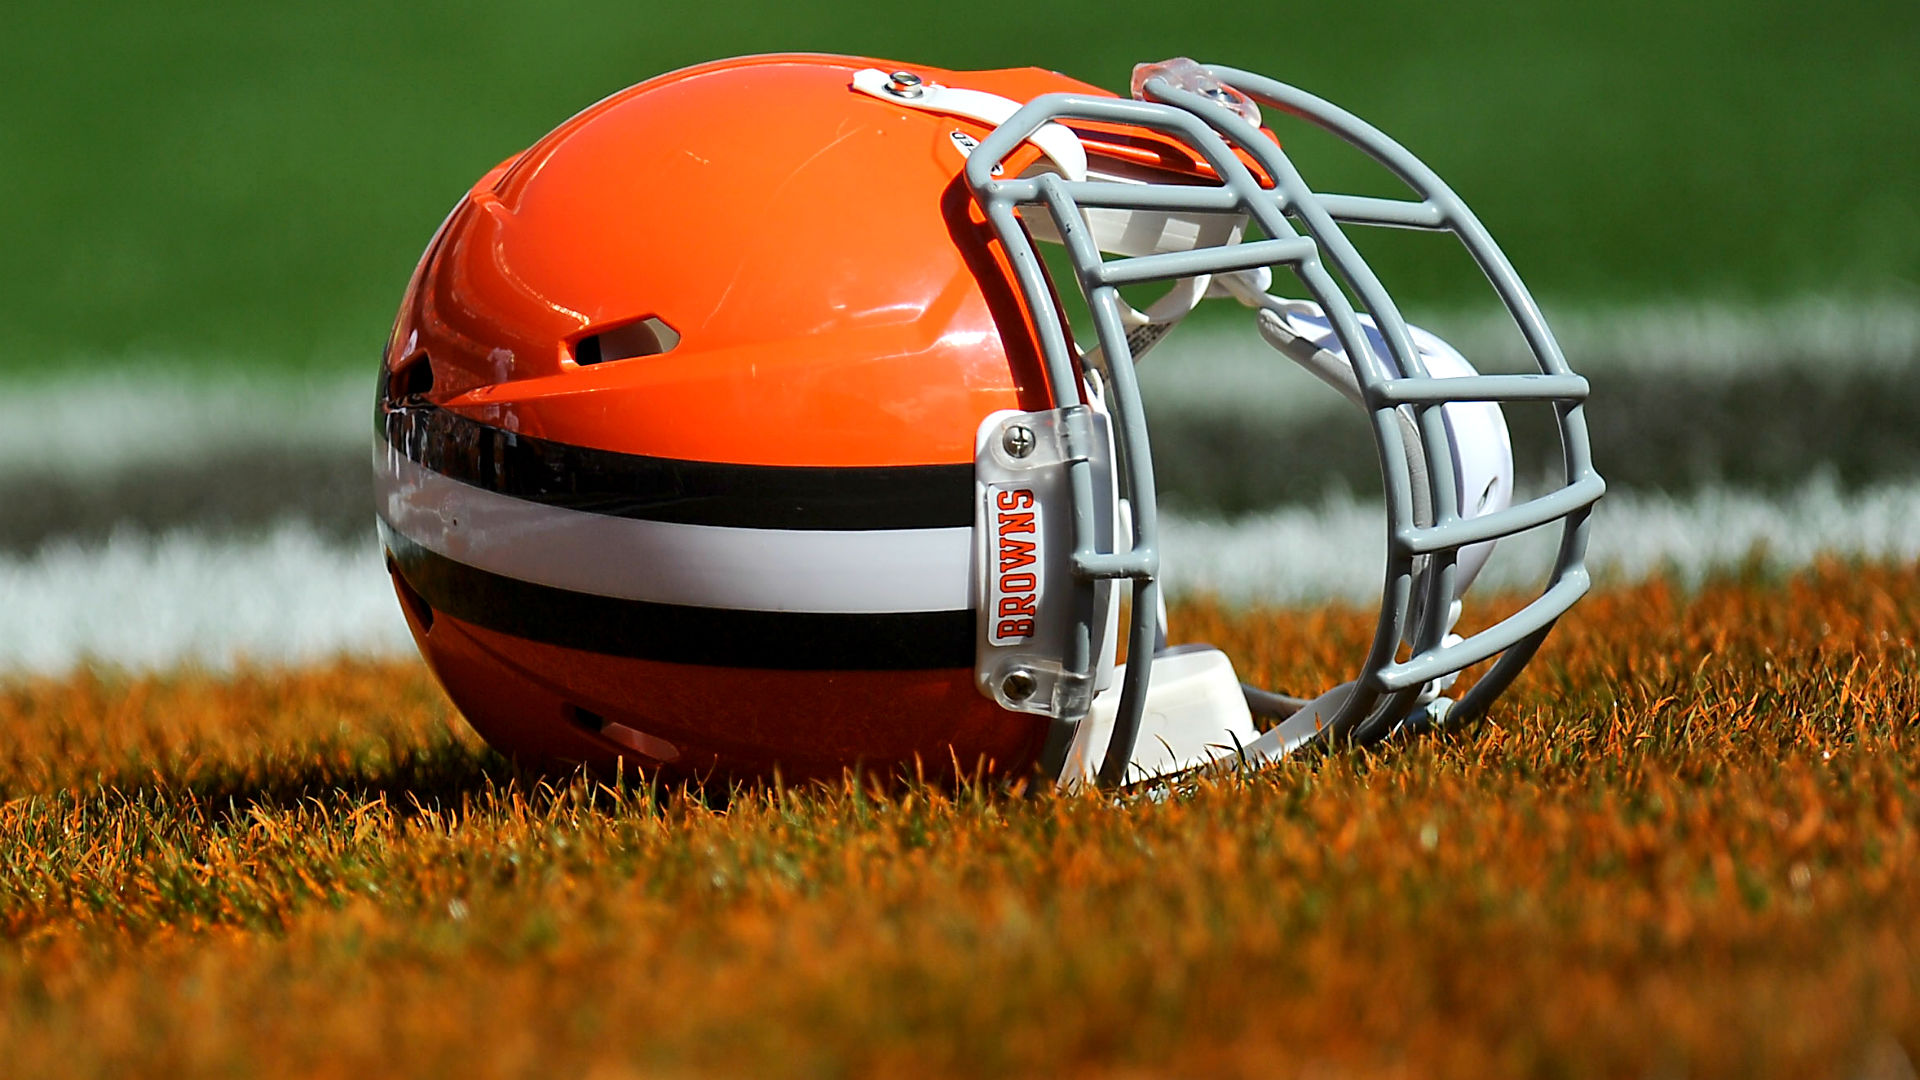 Dear Browns: For new logo, tread lightly, build on past